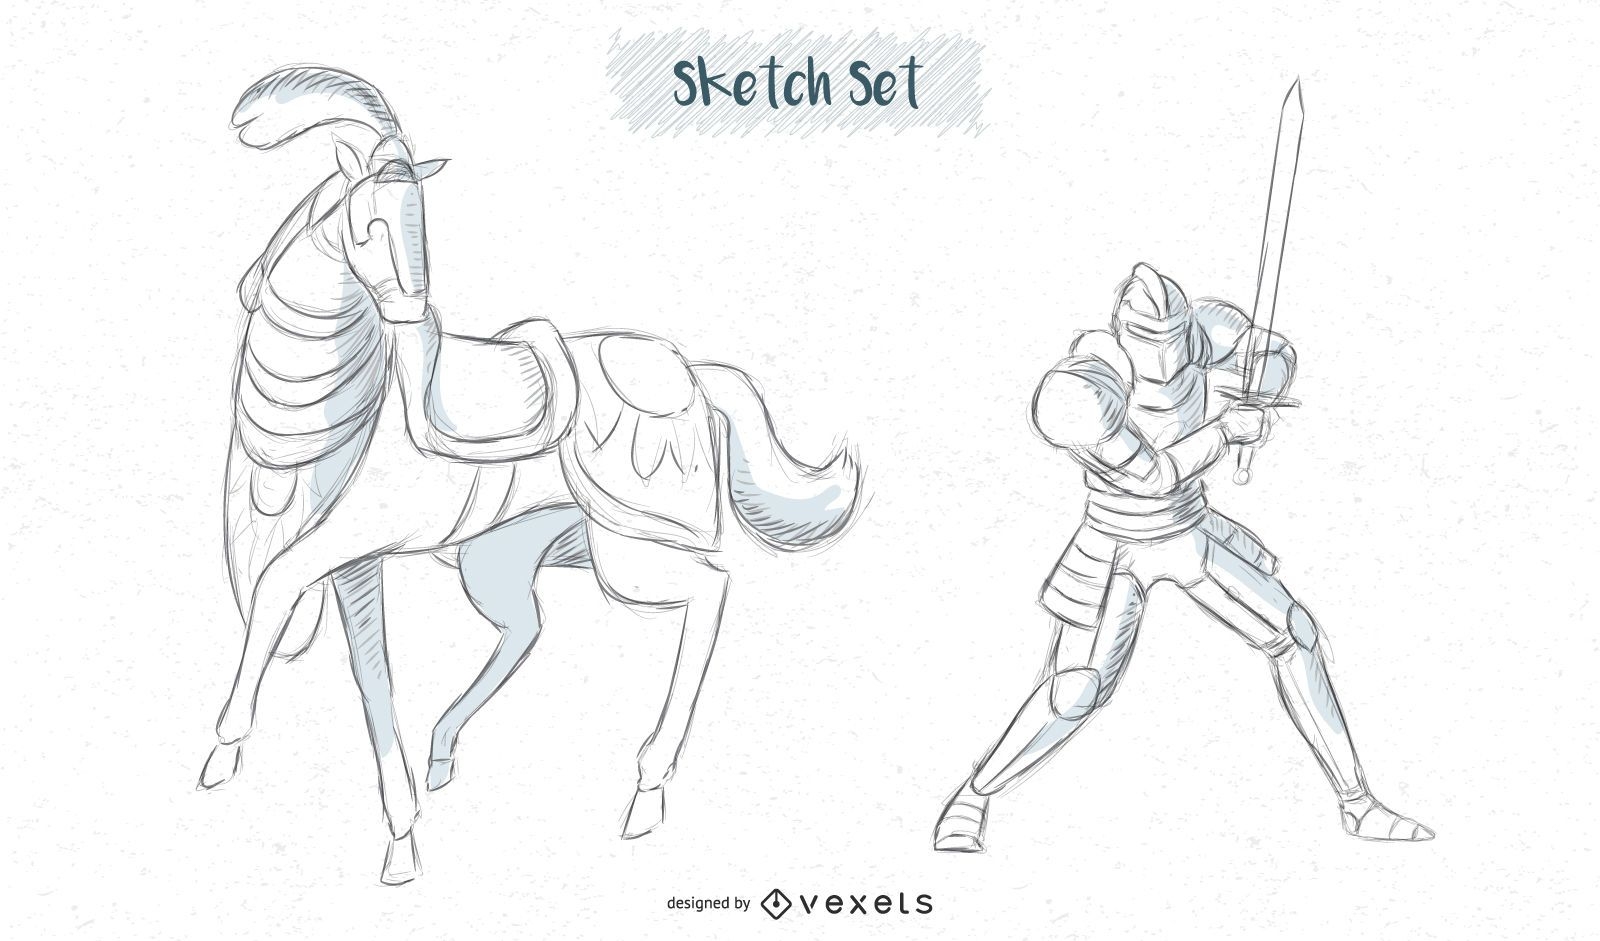 horse and knight sketch designs